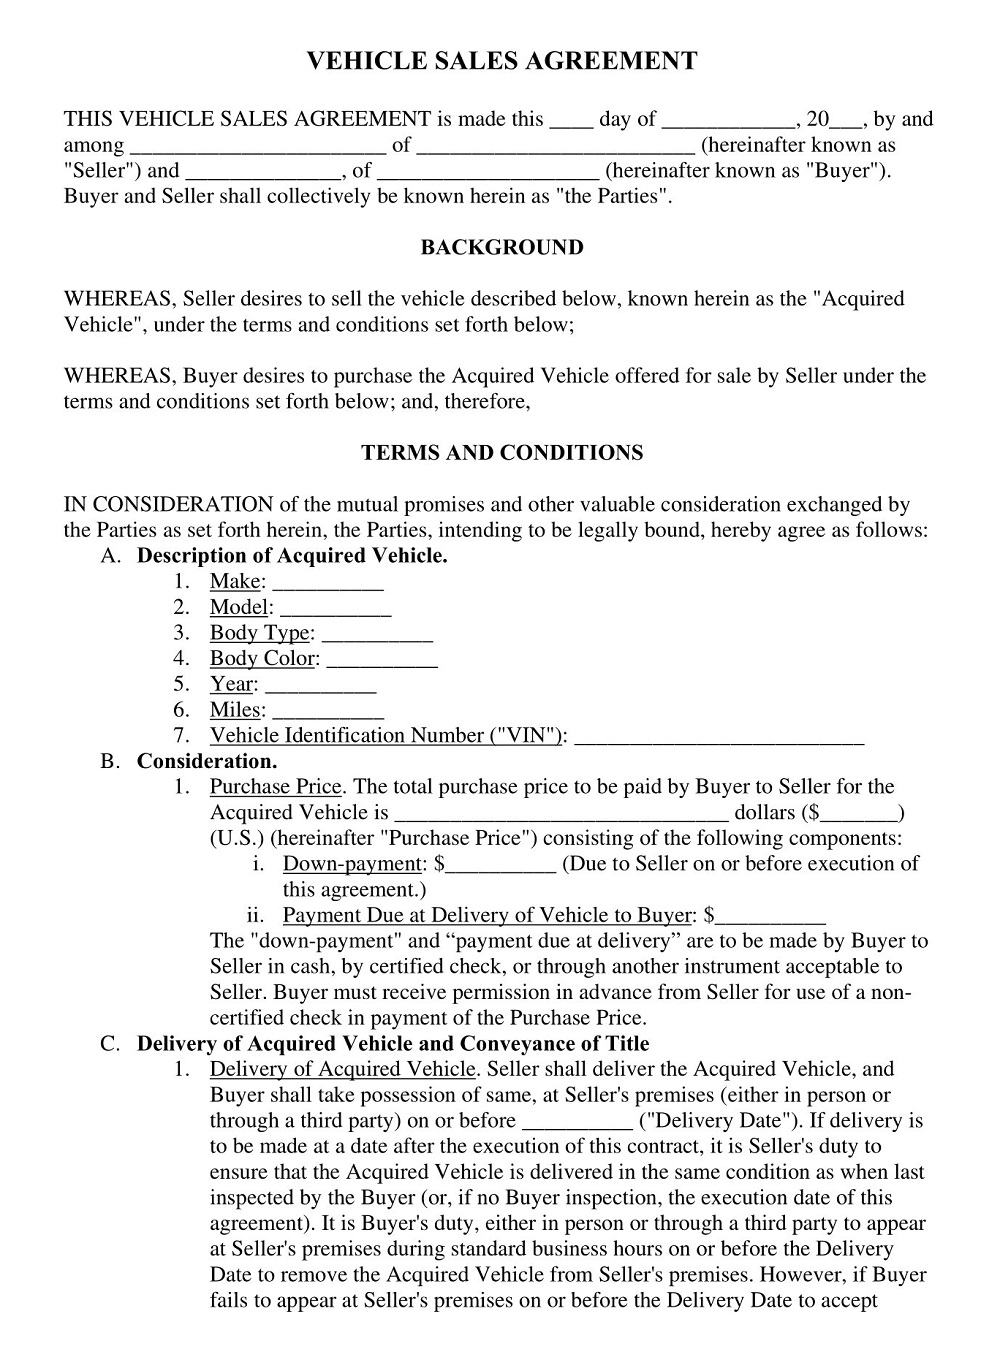 Vehicle Sales Agreement Form Template